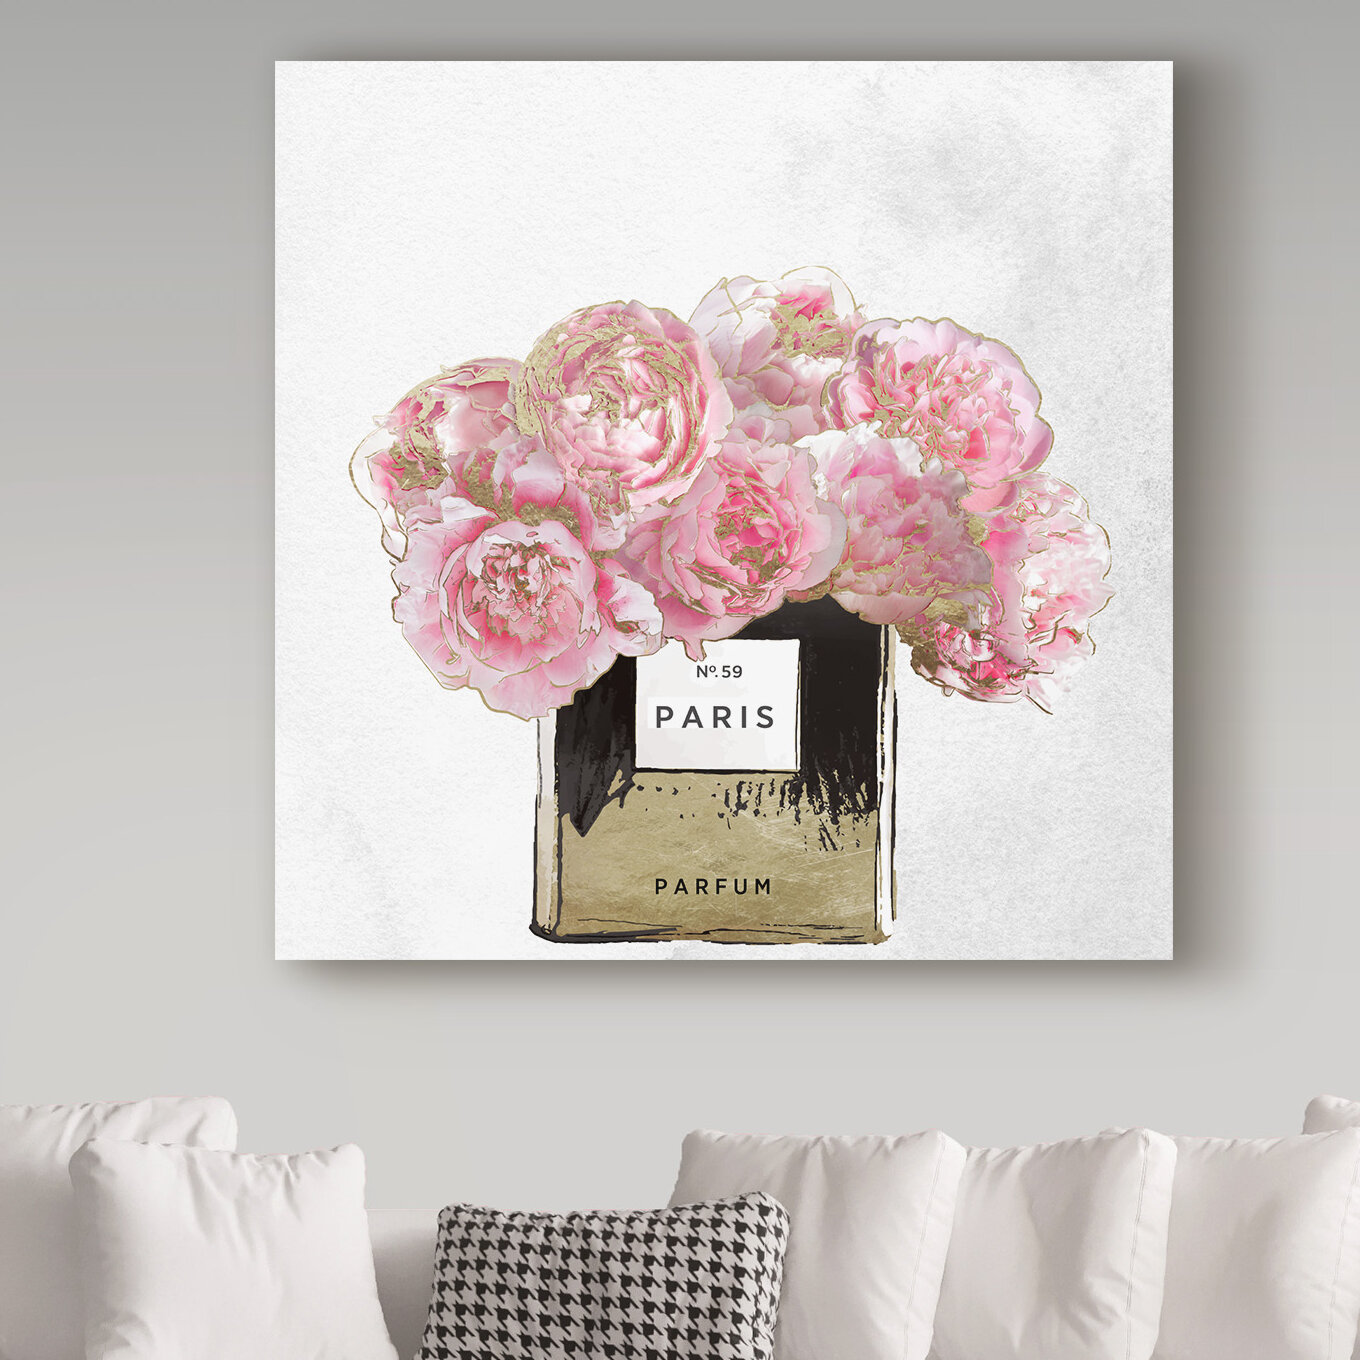 New Books Grey Blush With Box Of Roses Throw Pillow By Amanda